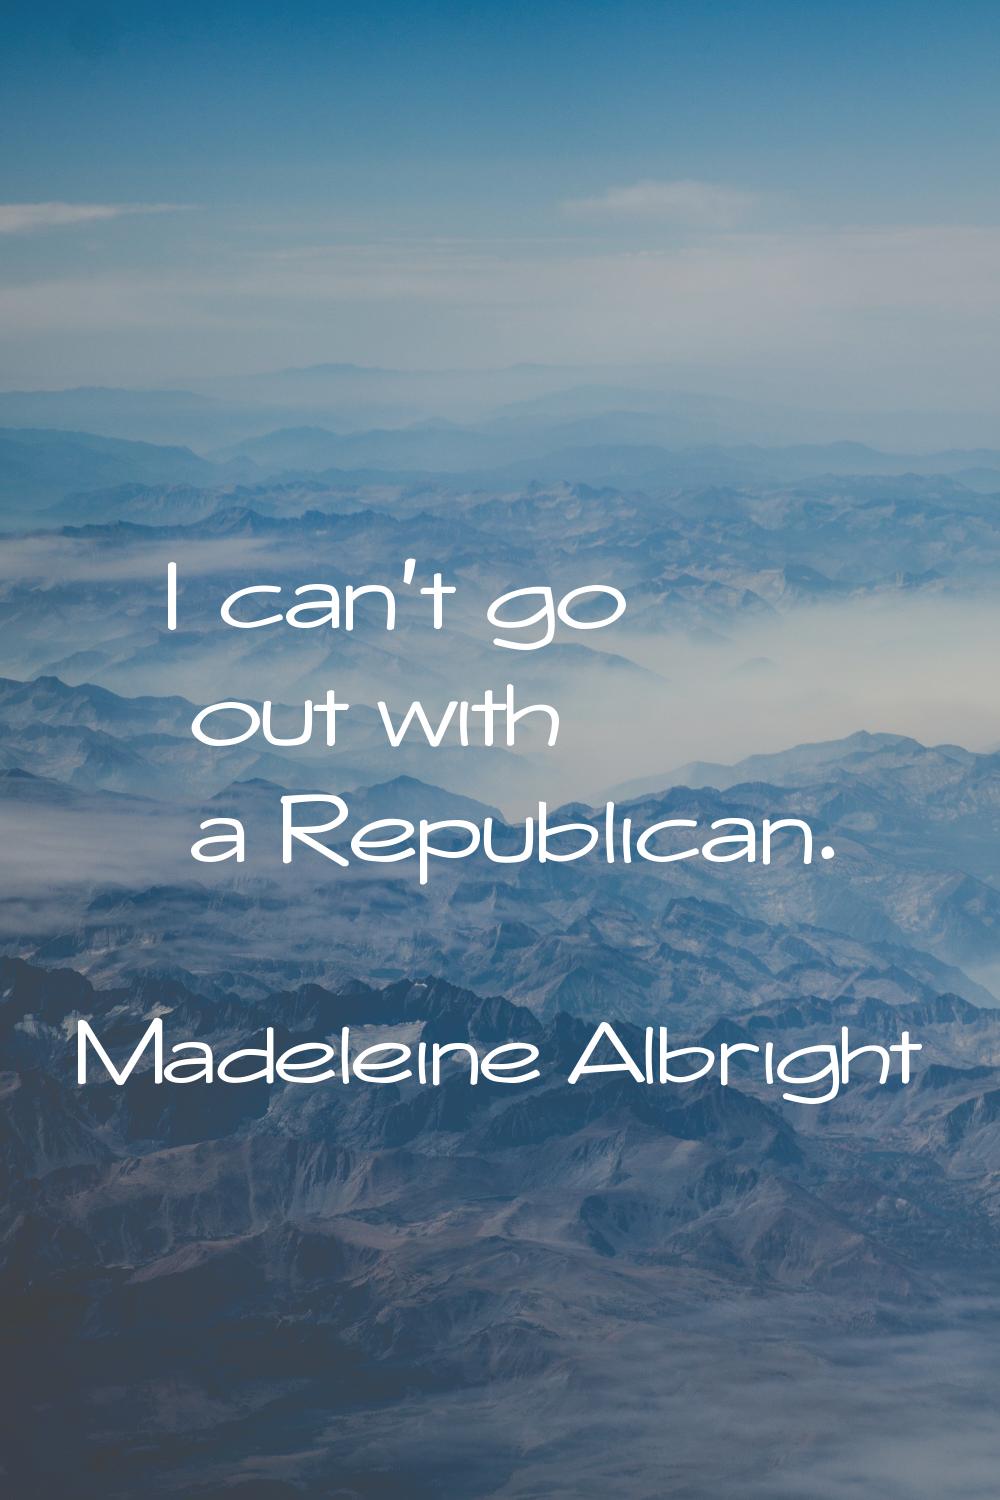 I can't go out with a Republican.